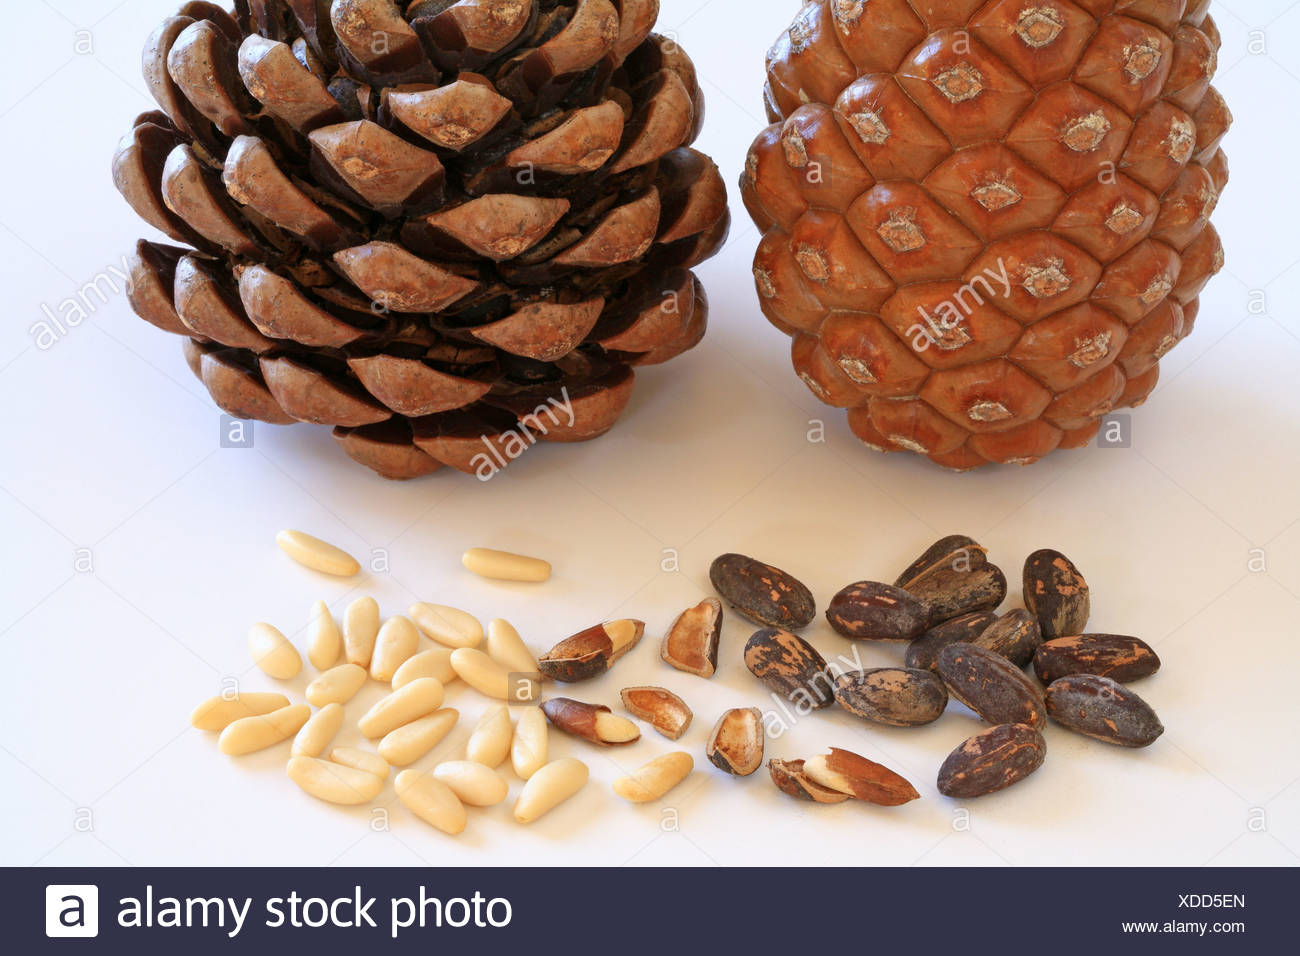 Closed and open pine cone, pine nuts with and without shell Stock ...